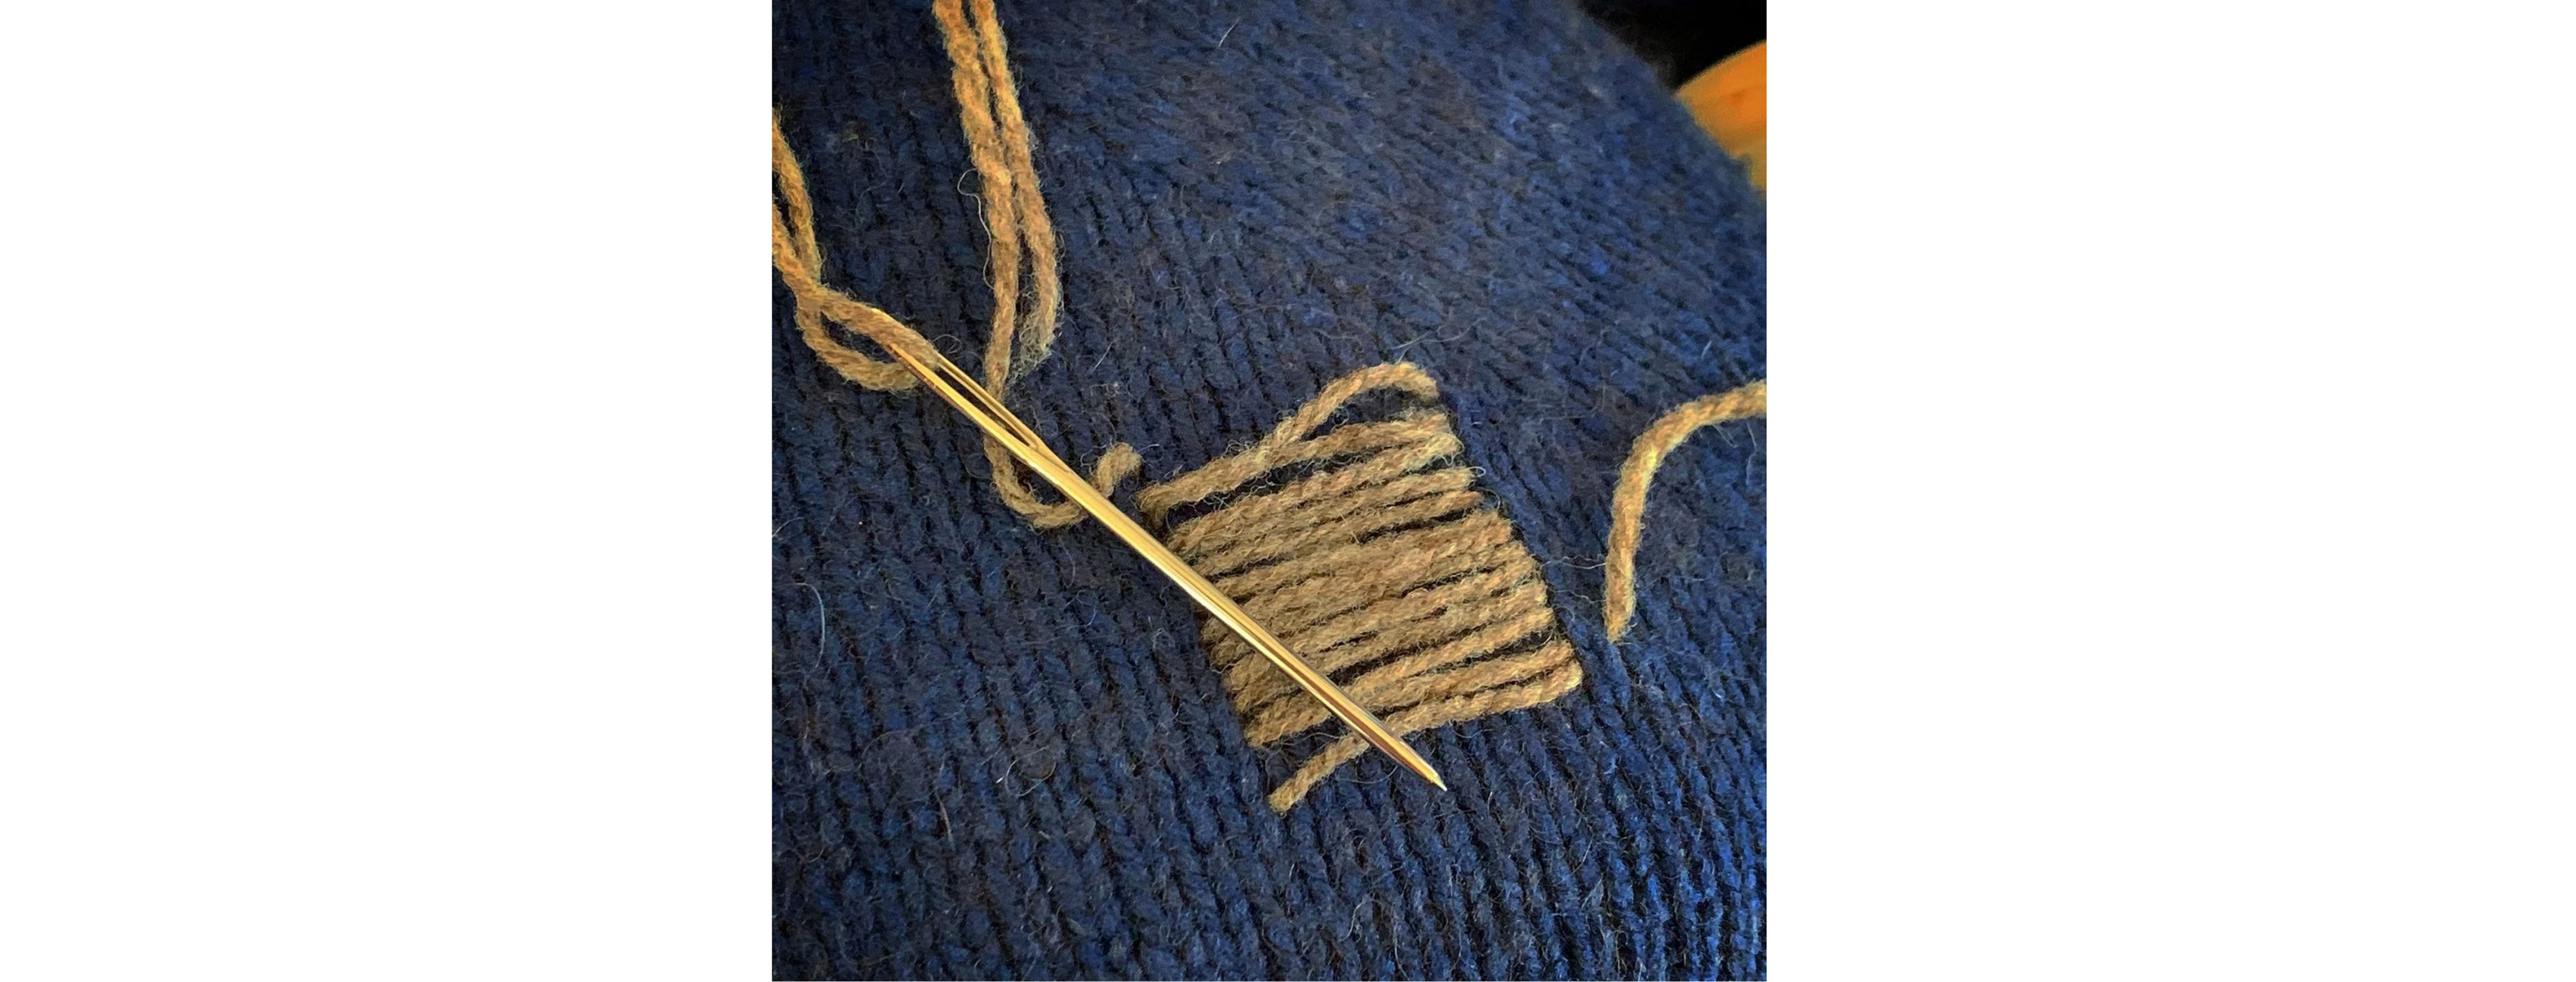 Wrap the damaged area with suitable length of yarn